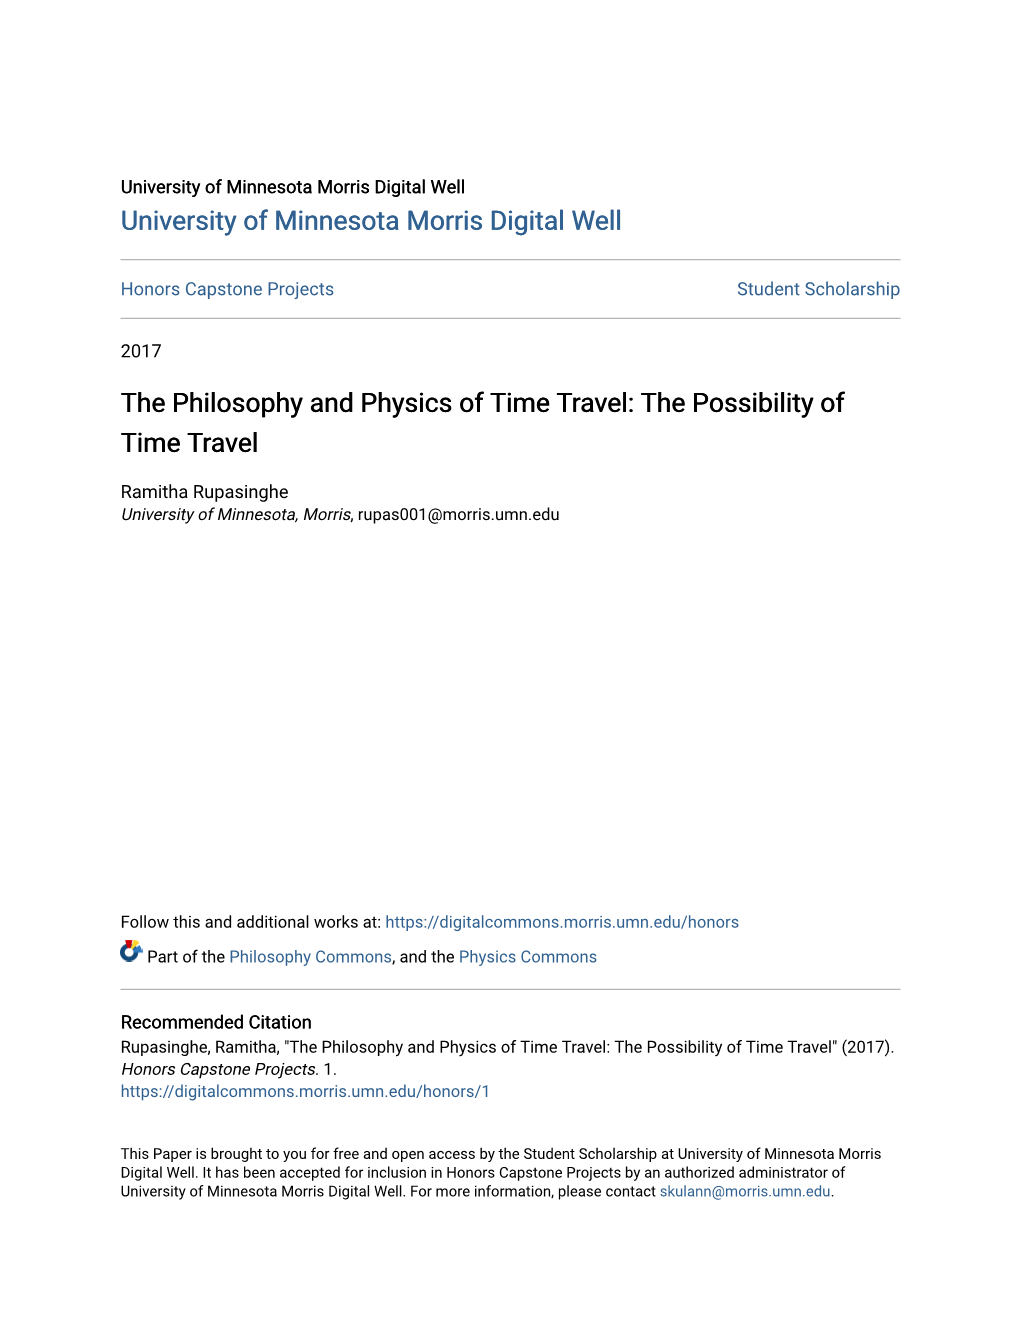 The Philosophy and Physics of Time Travel: the Possibility of Time Travel